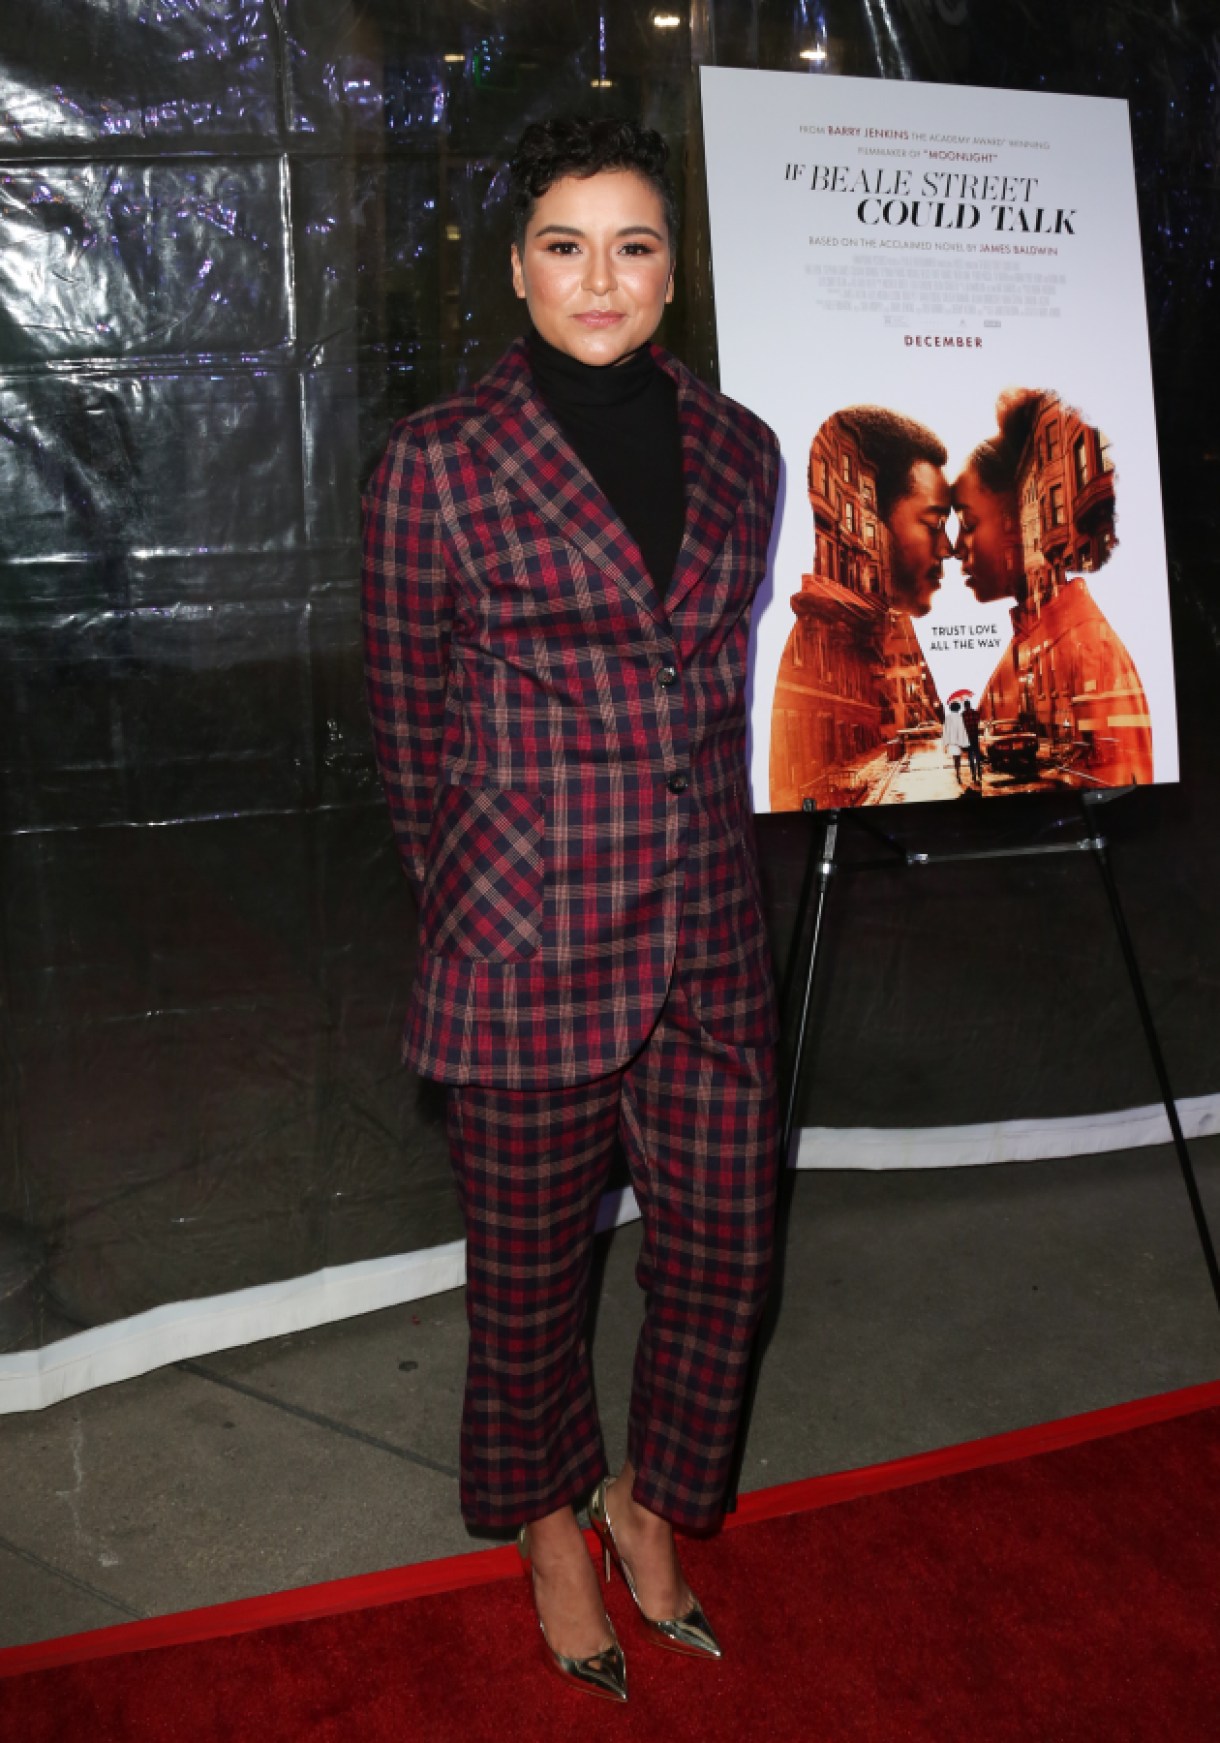 HOLLYWOOD, CALIFORNIA - DECEMBER 04: Actress Emily Rios  attends the screening of "If Beale Street Could Talk" at the ArcLight Hollywood on December 04, 2018 in Hollywood, California. (Photo by Paul Archuleta/FilmMagic)